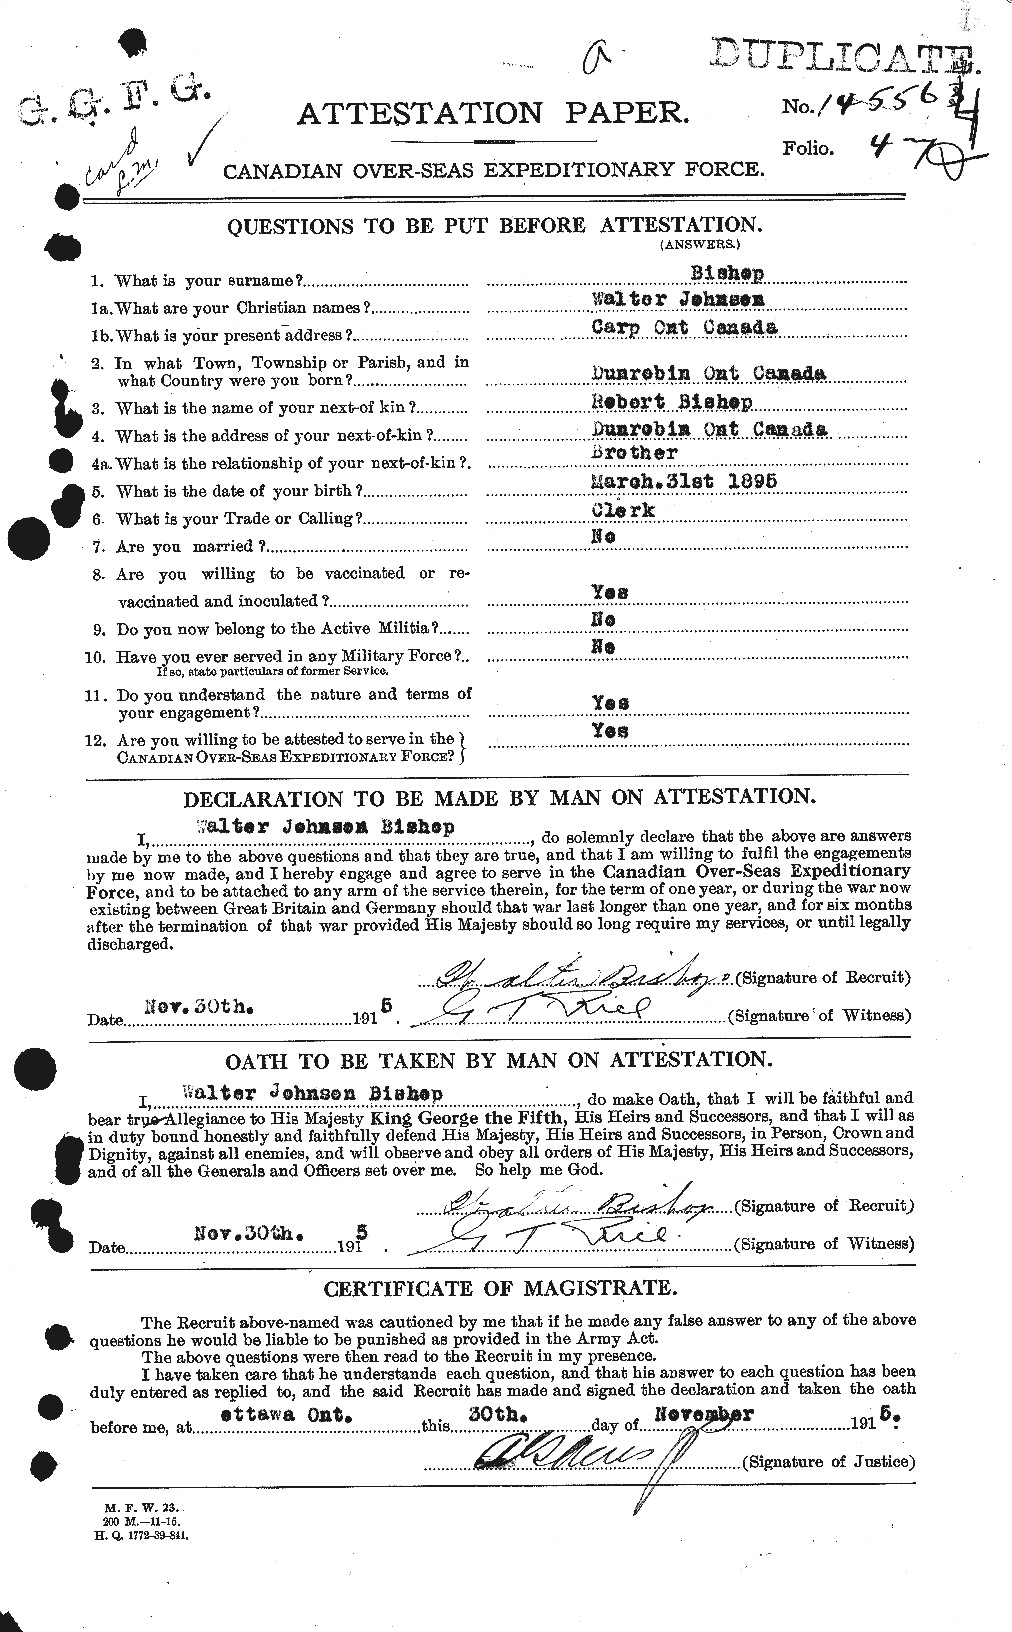 Personnel Records of the First World War - CEF 245622a